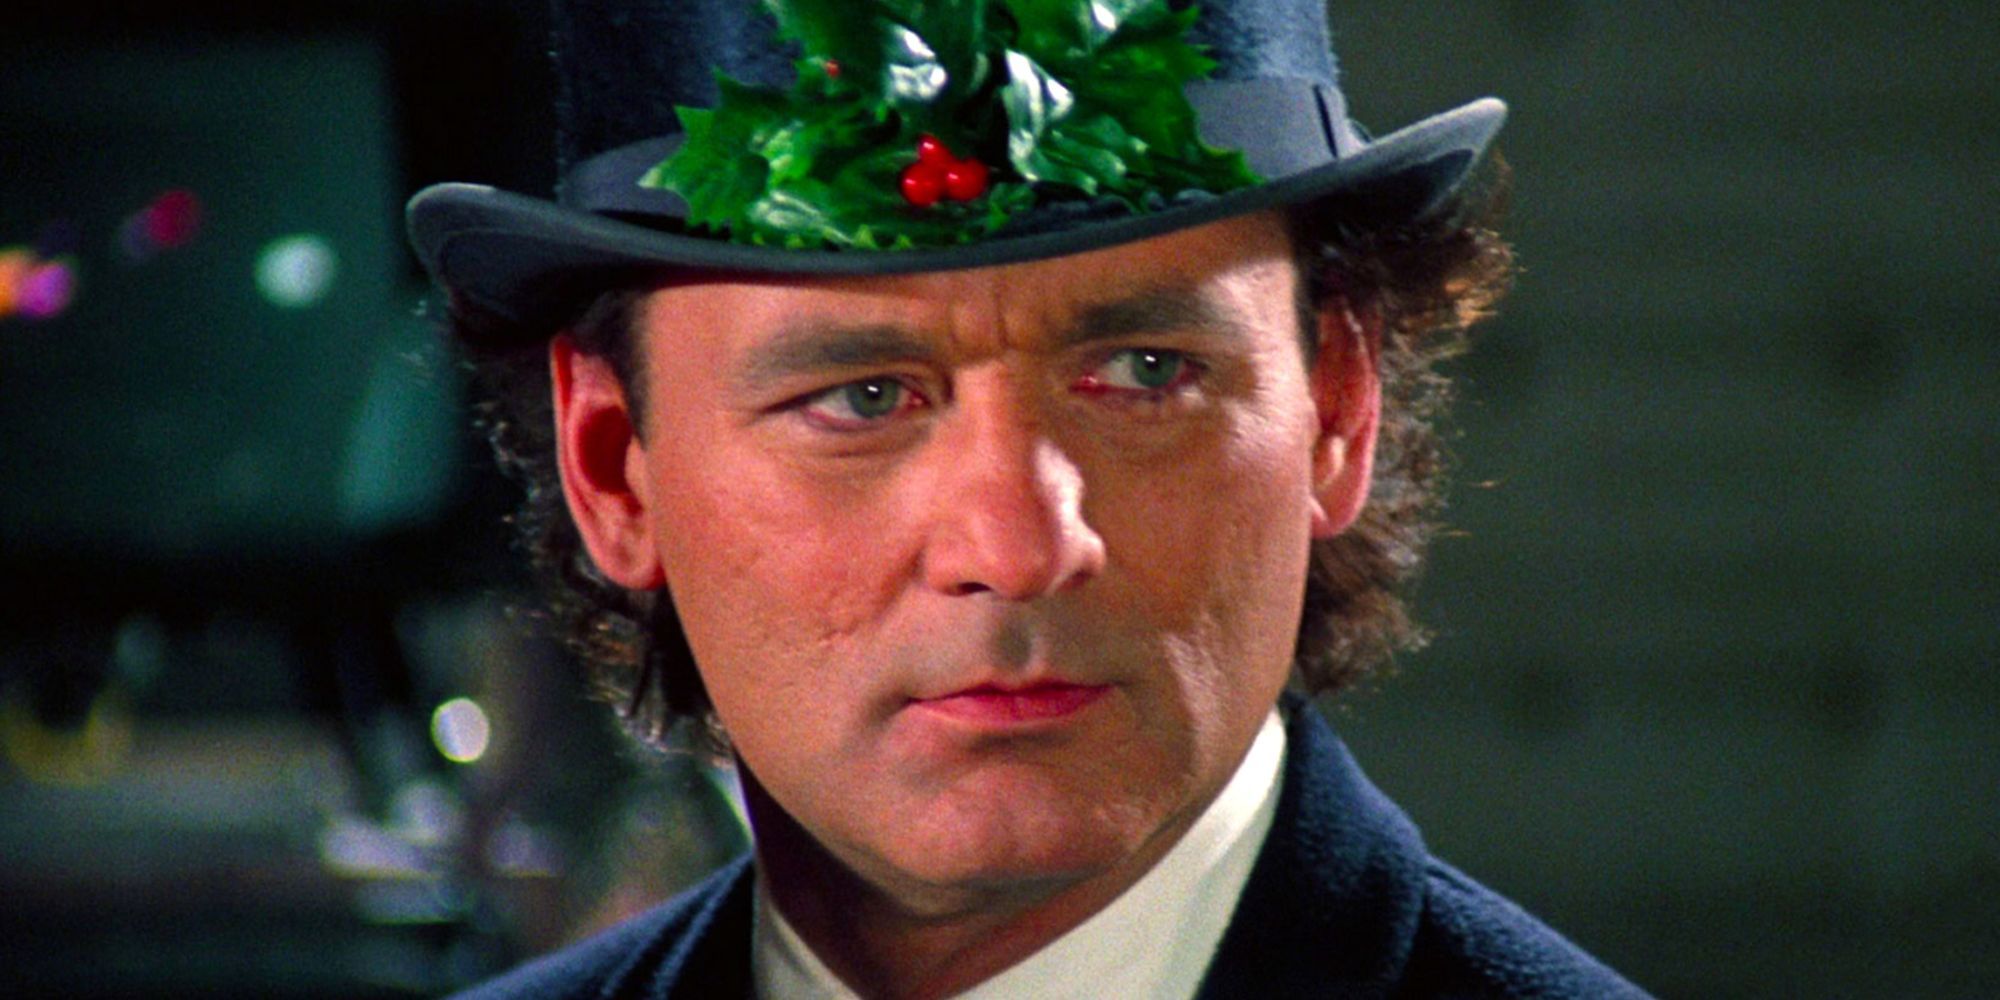 Frank Cross wears a top hat with a holly on it 